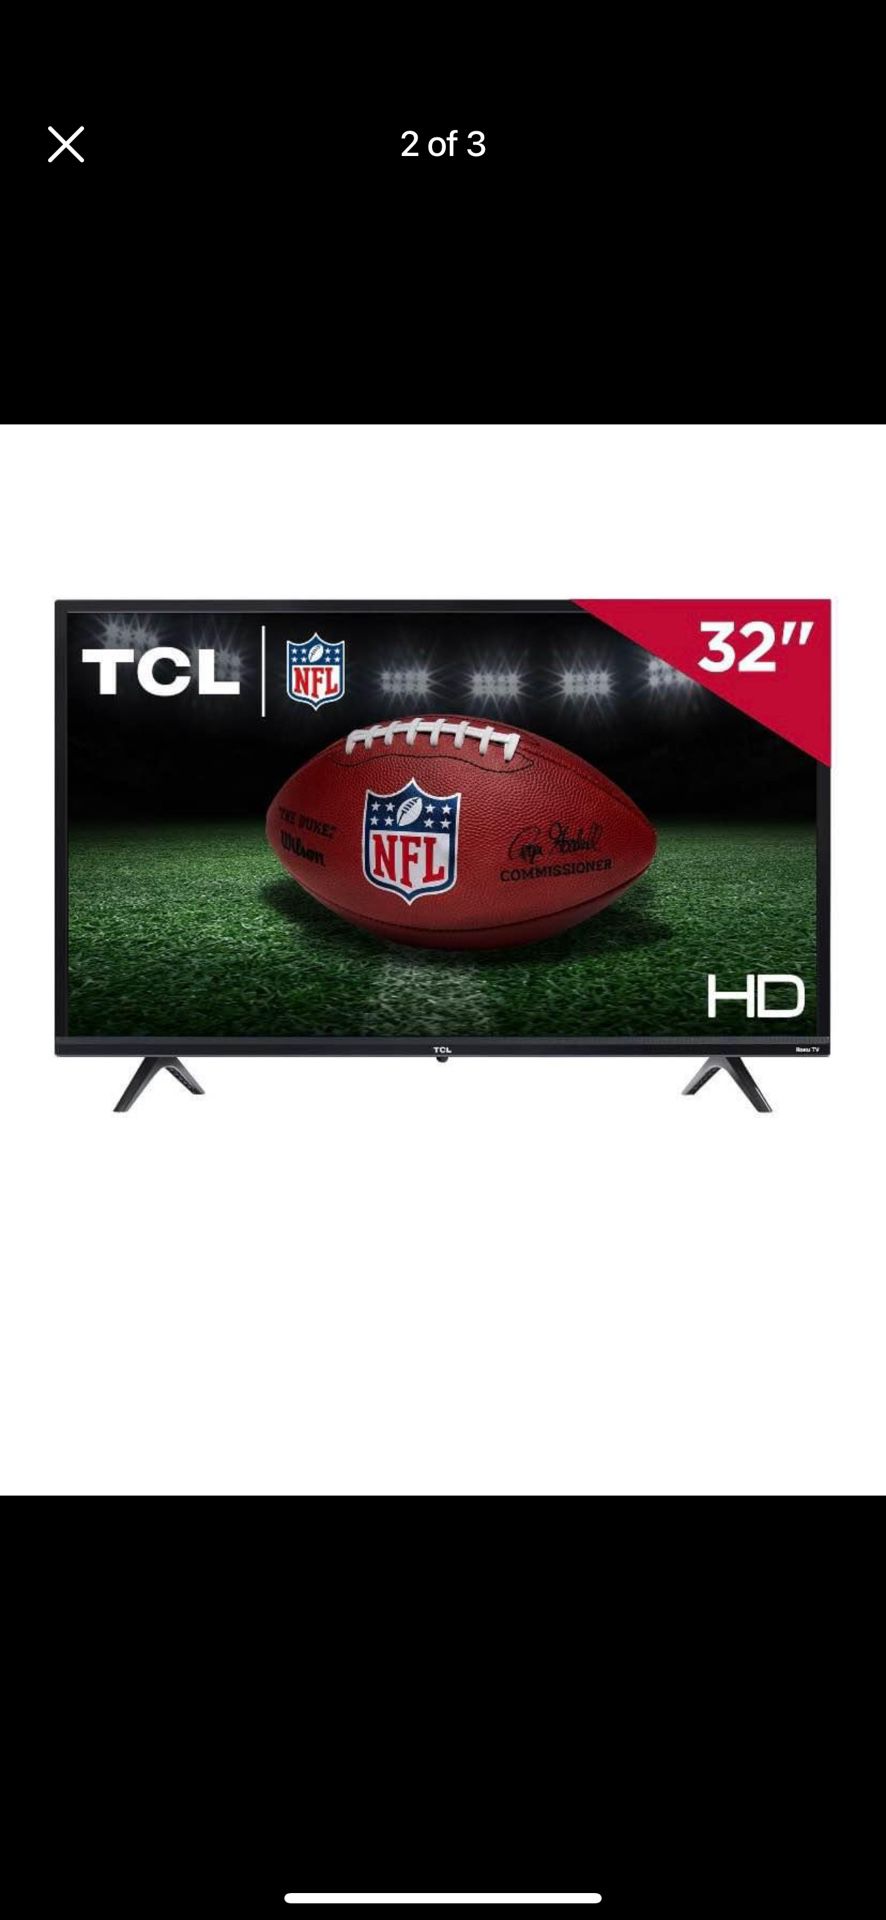 TCL 32"Class 720 HD LED Roku Smart TV  (TV Stand NOT INCLUDED)